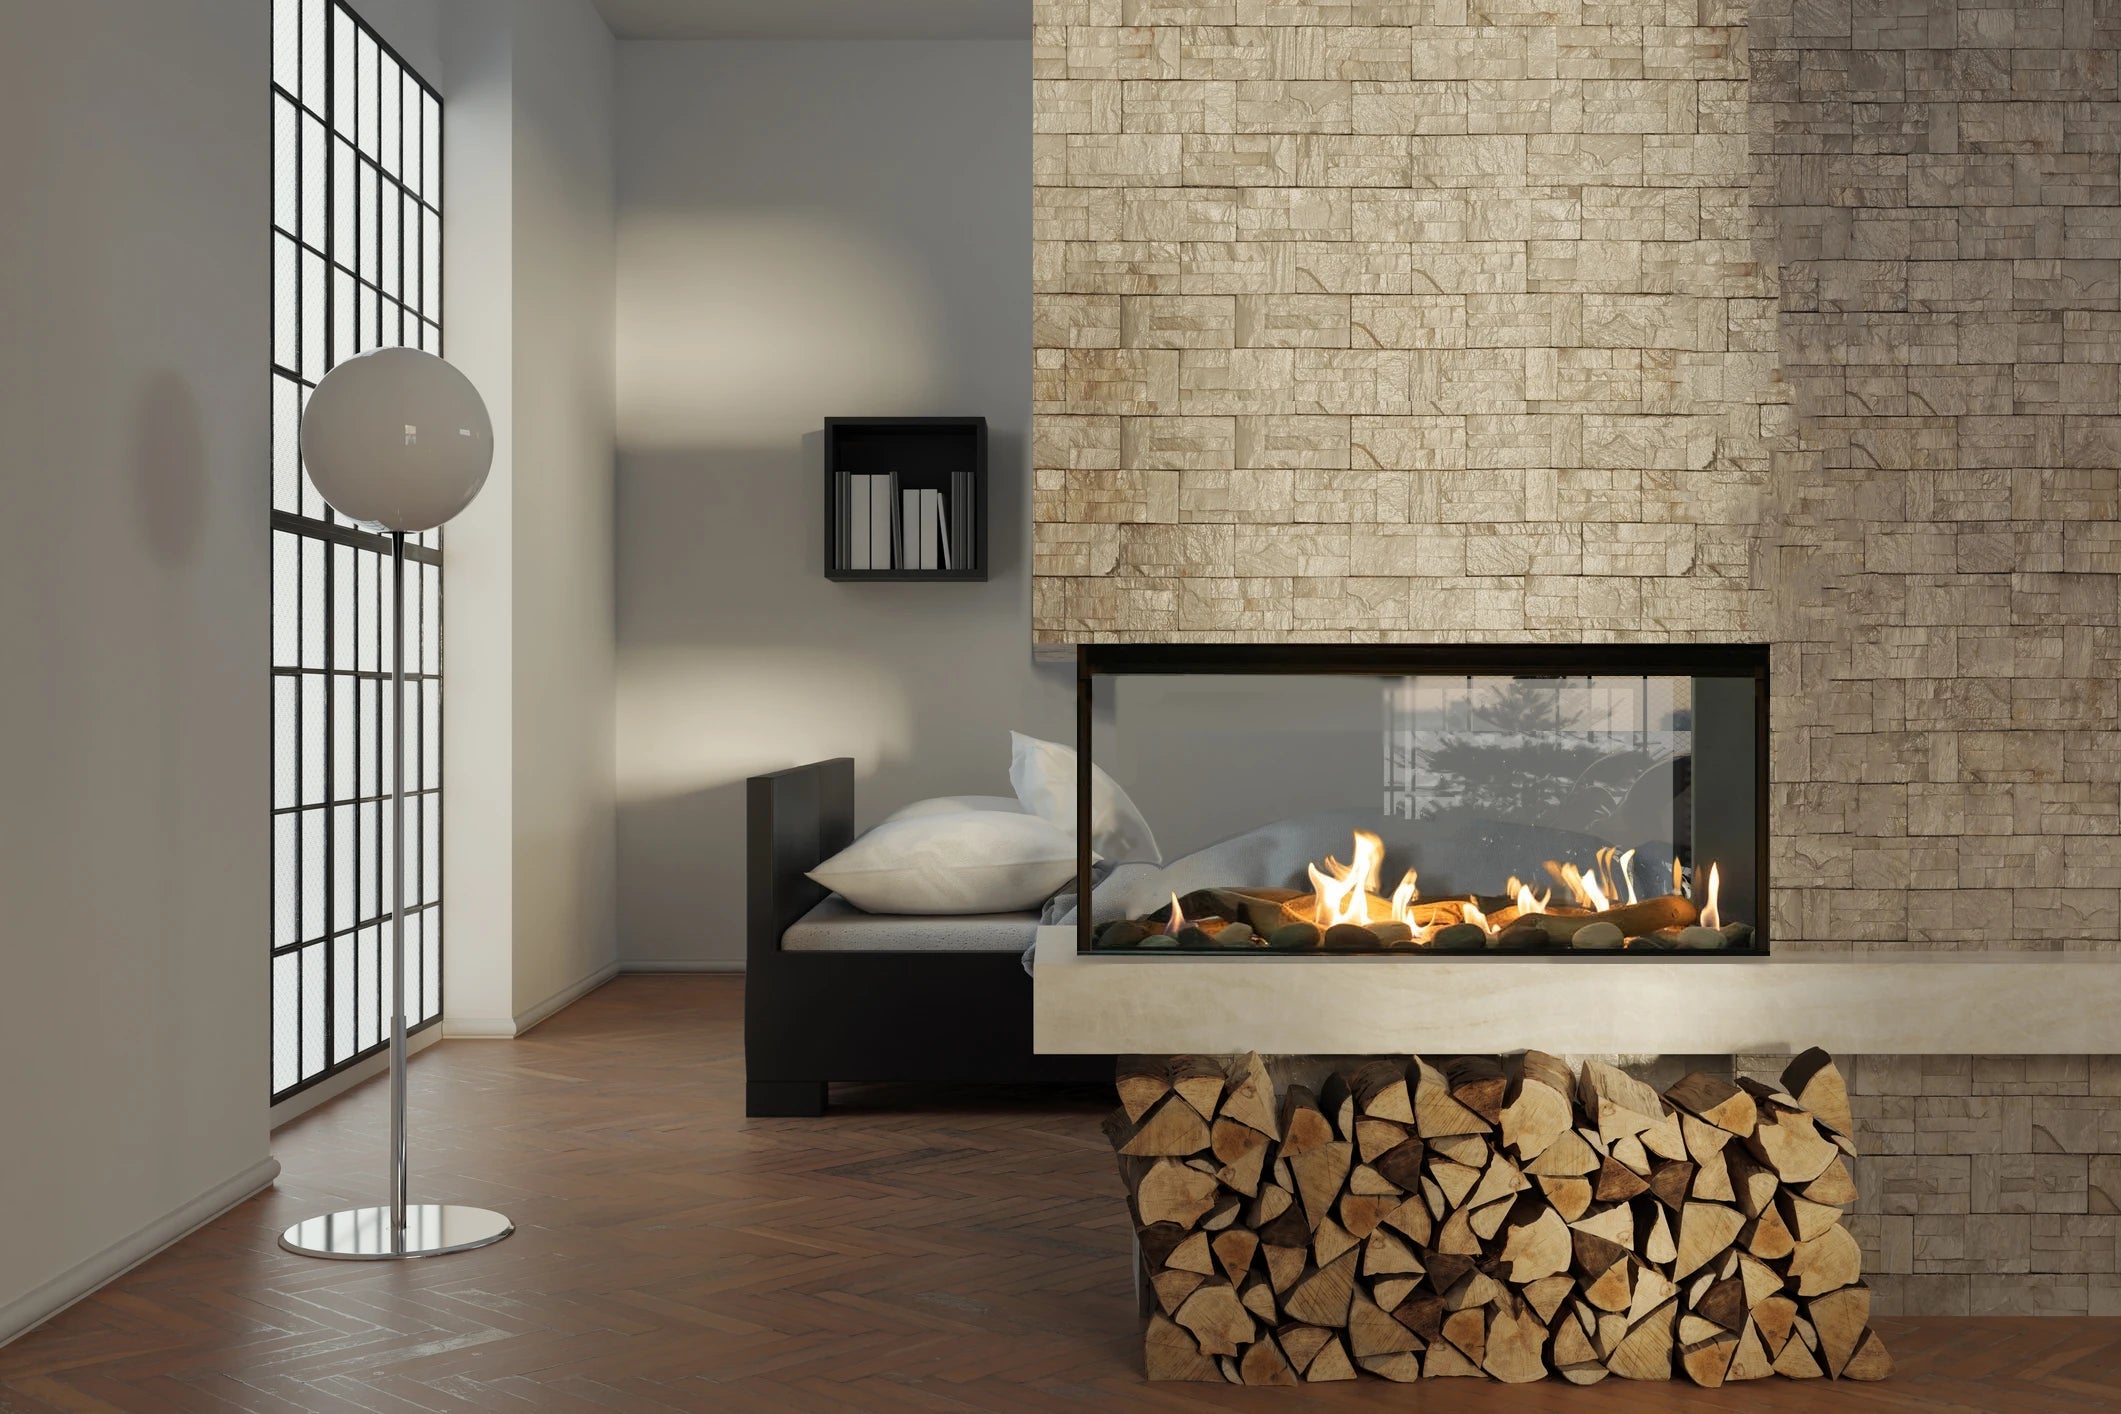 Sierra Flame Lyon 48" 4 Sided See Through Natural Gas Fireplace- Lifestyle Bedroom With Brick Wall See Through Fireplace